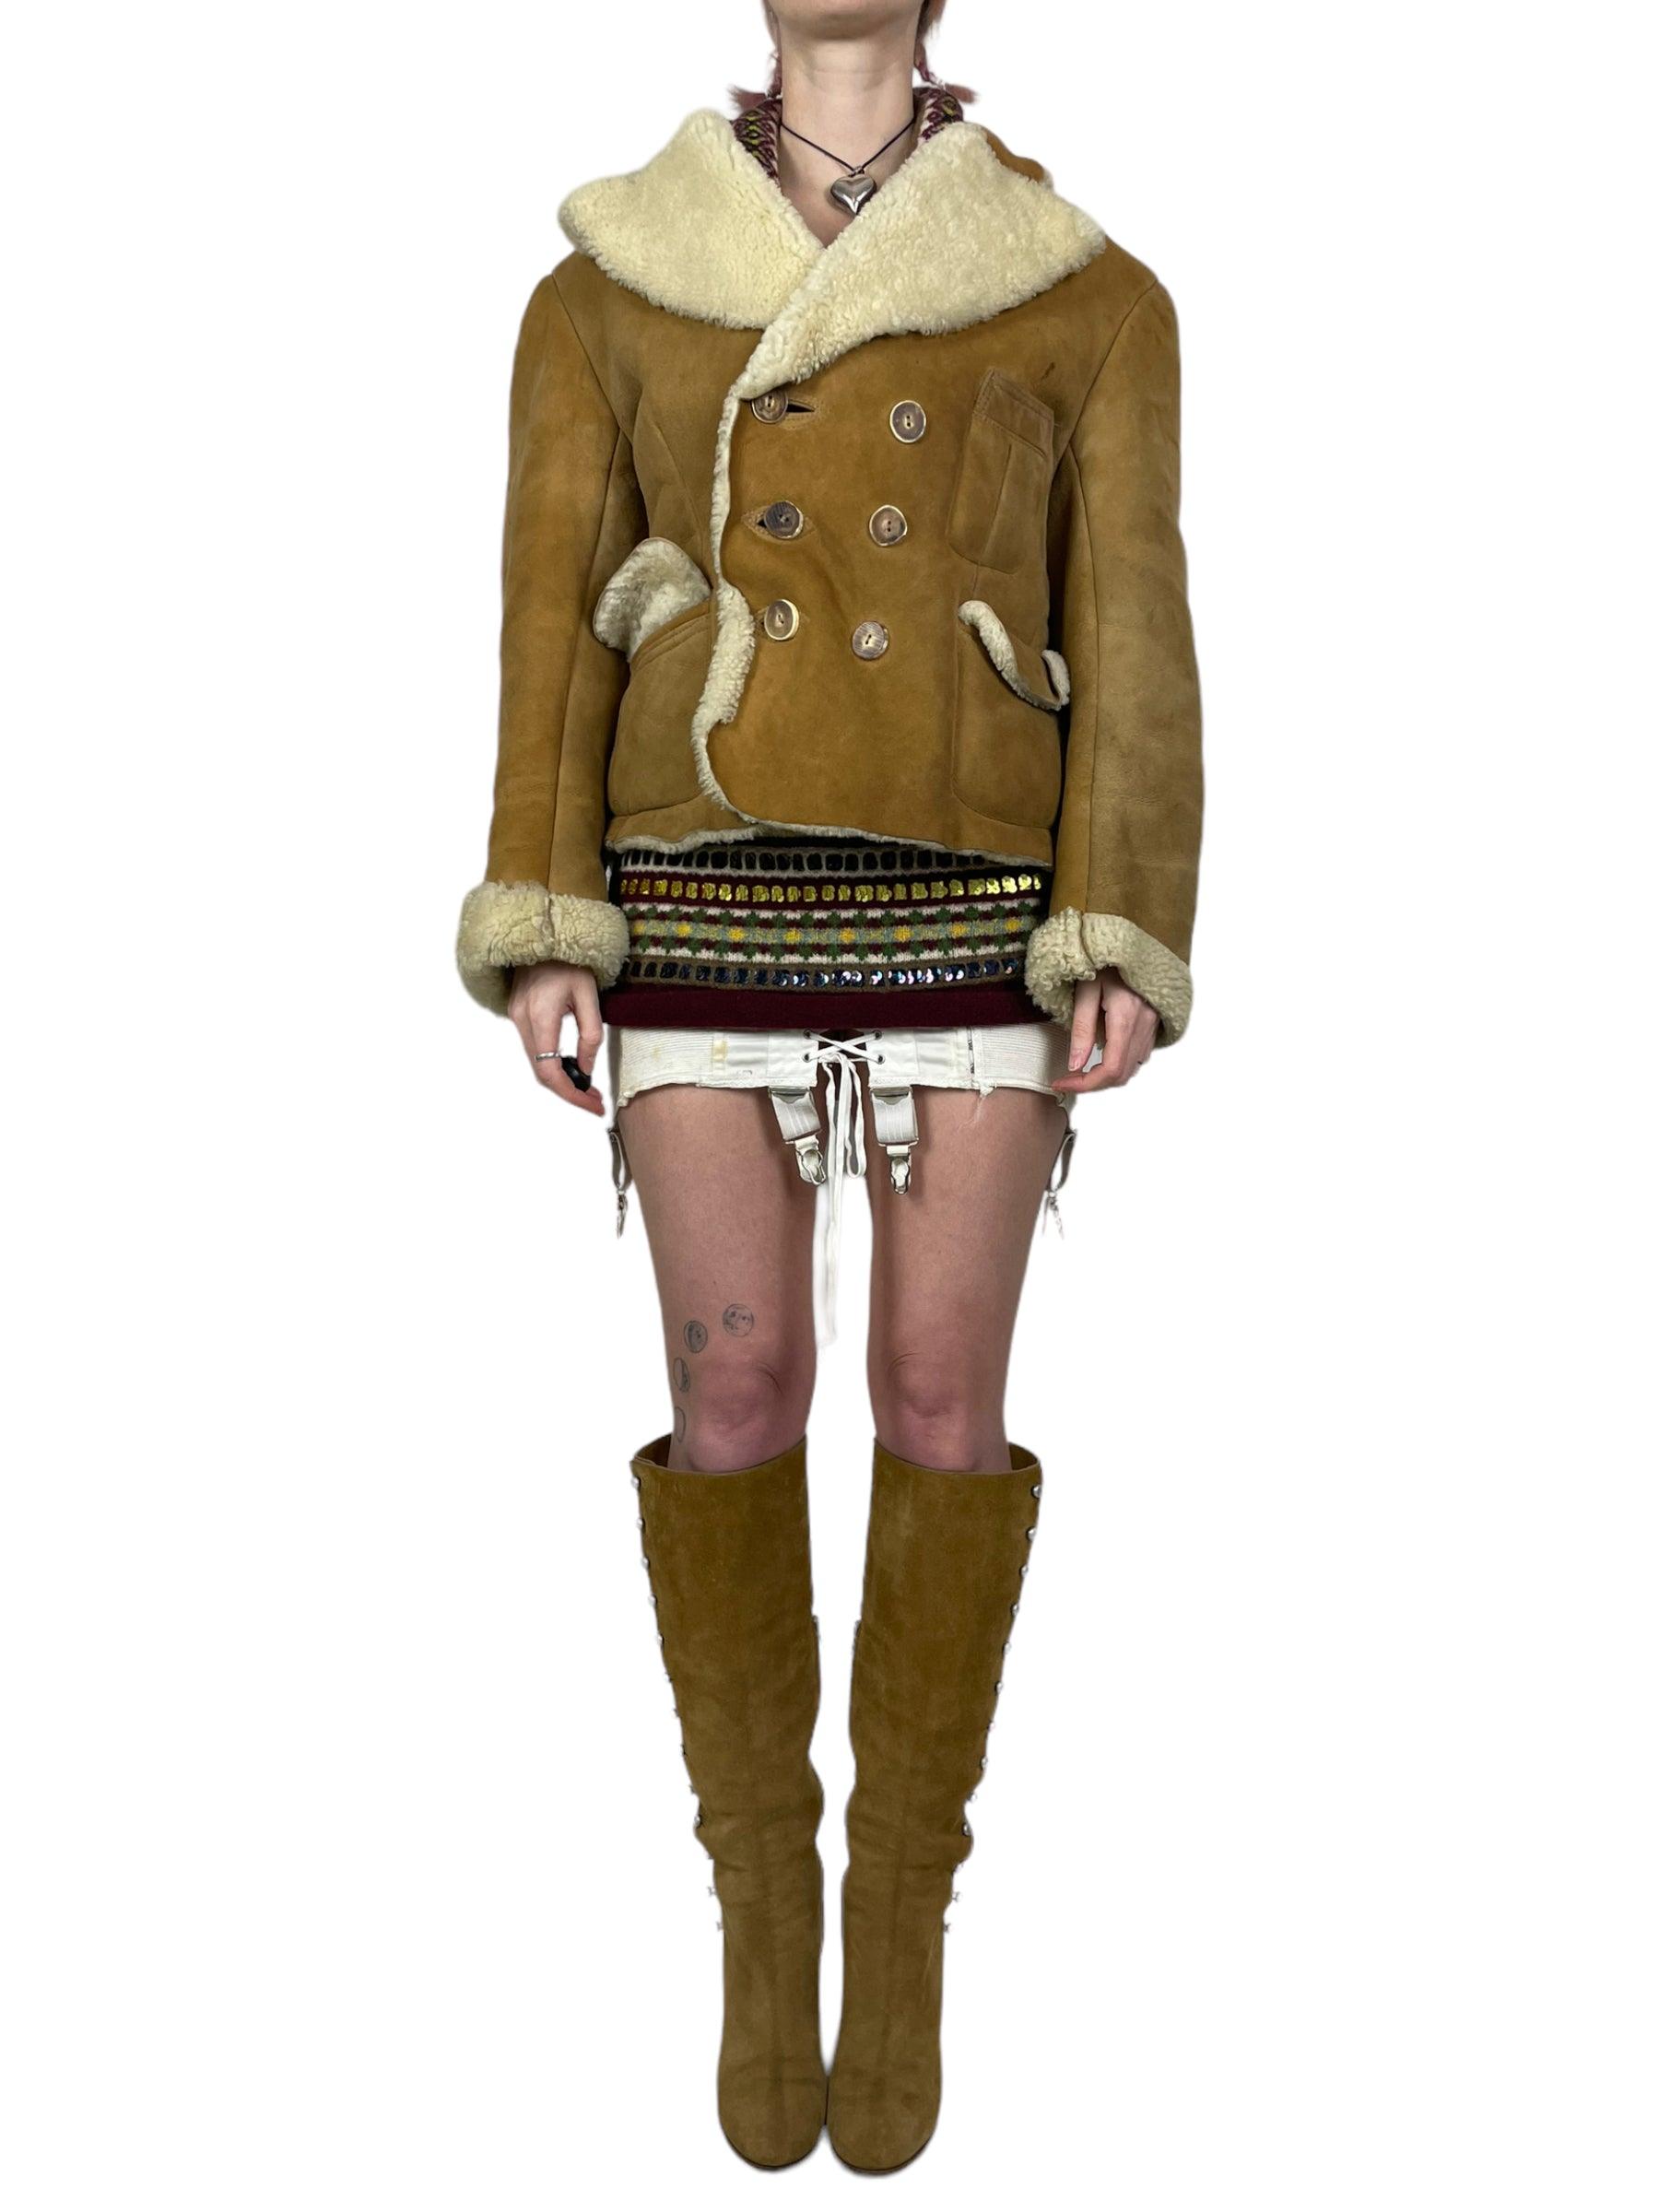 Vivienne Westwood AW1988 reissue of AW1982 Nostalgia of Mud shearling jacket - Known Source